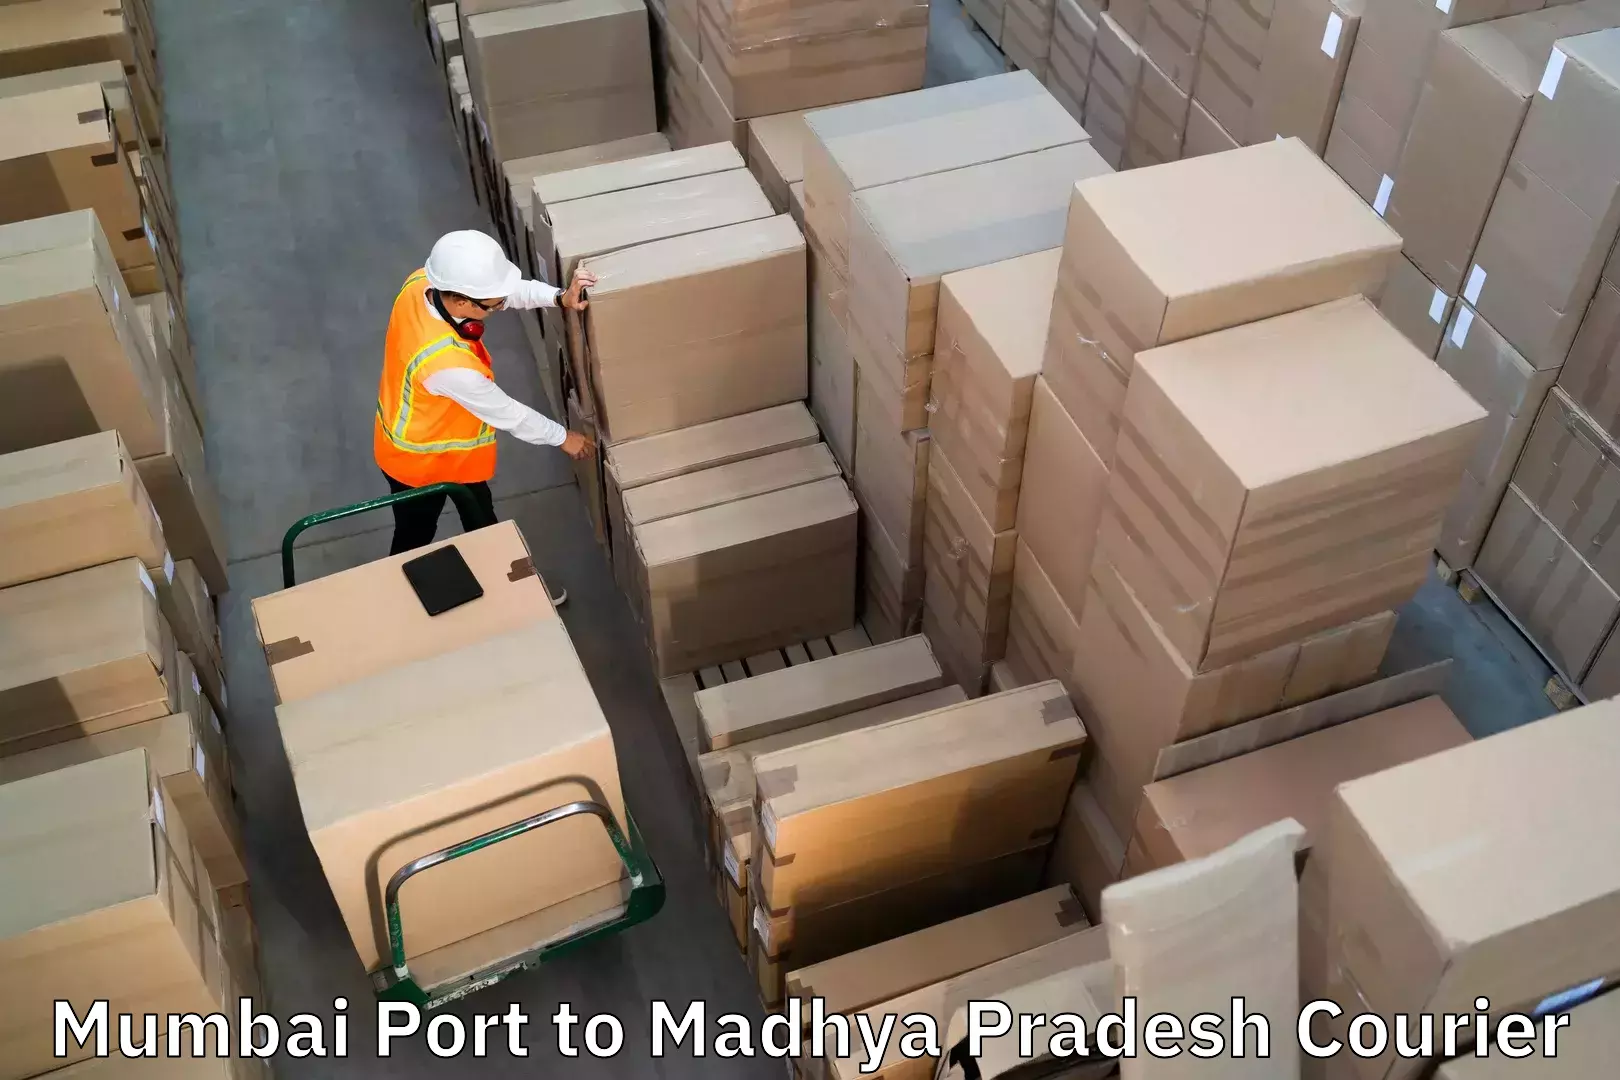 Train station baggage courier Mumbai Port to Sehore